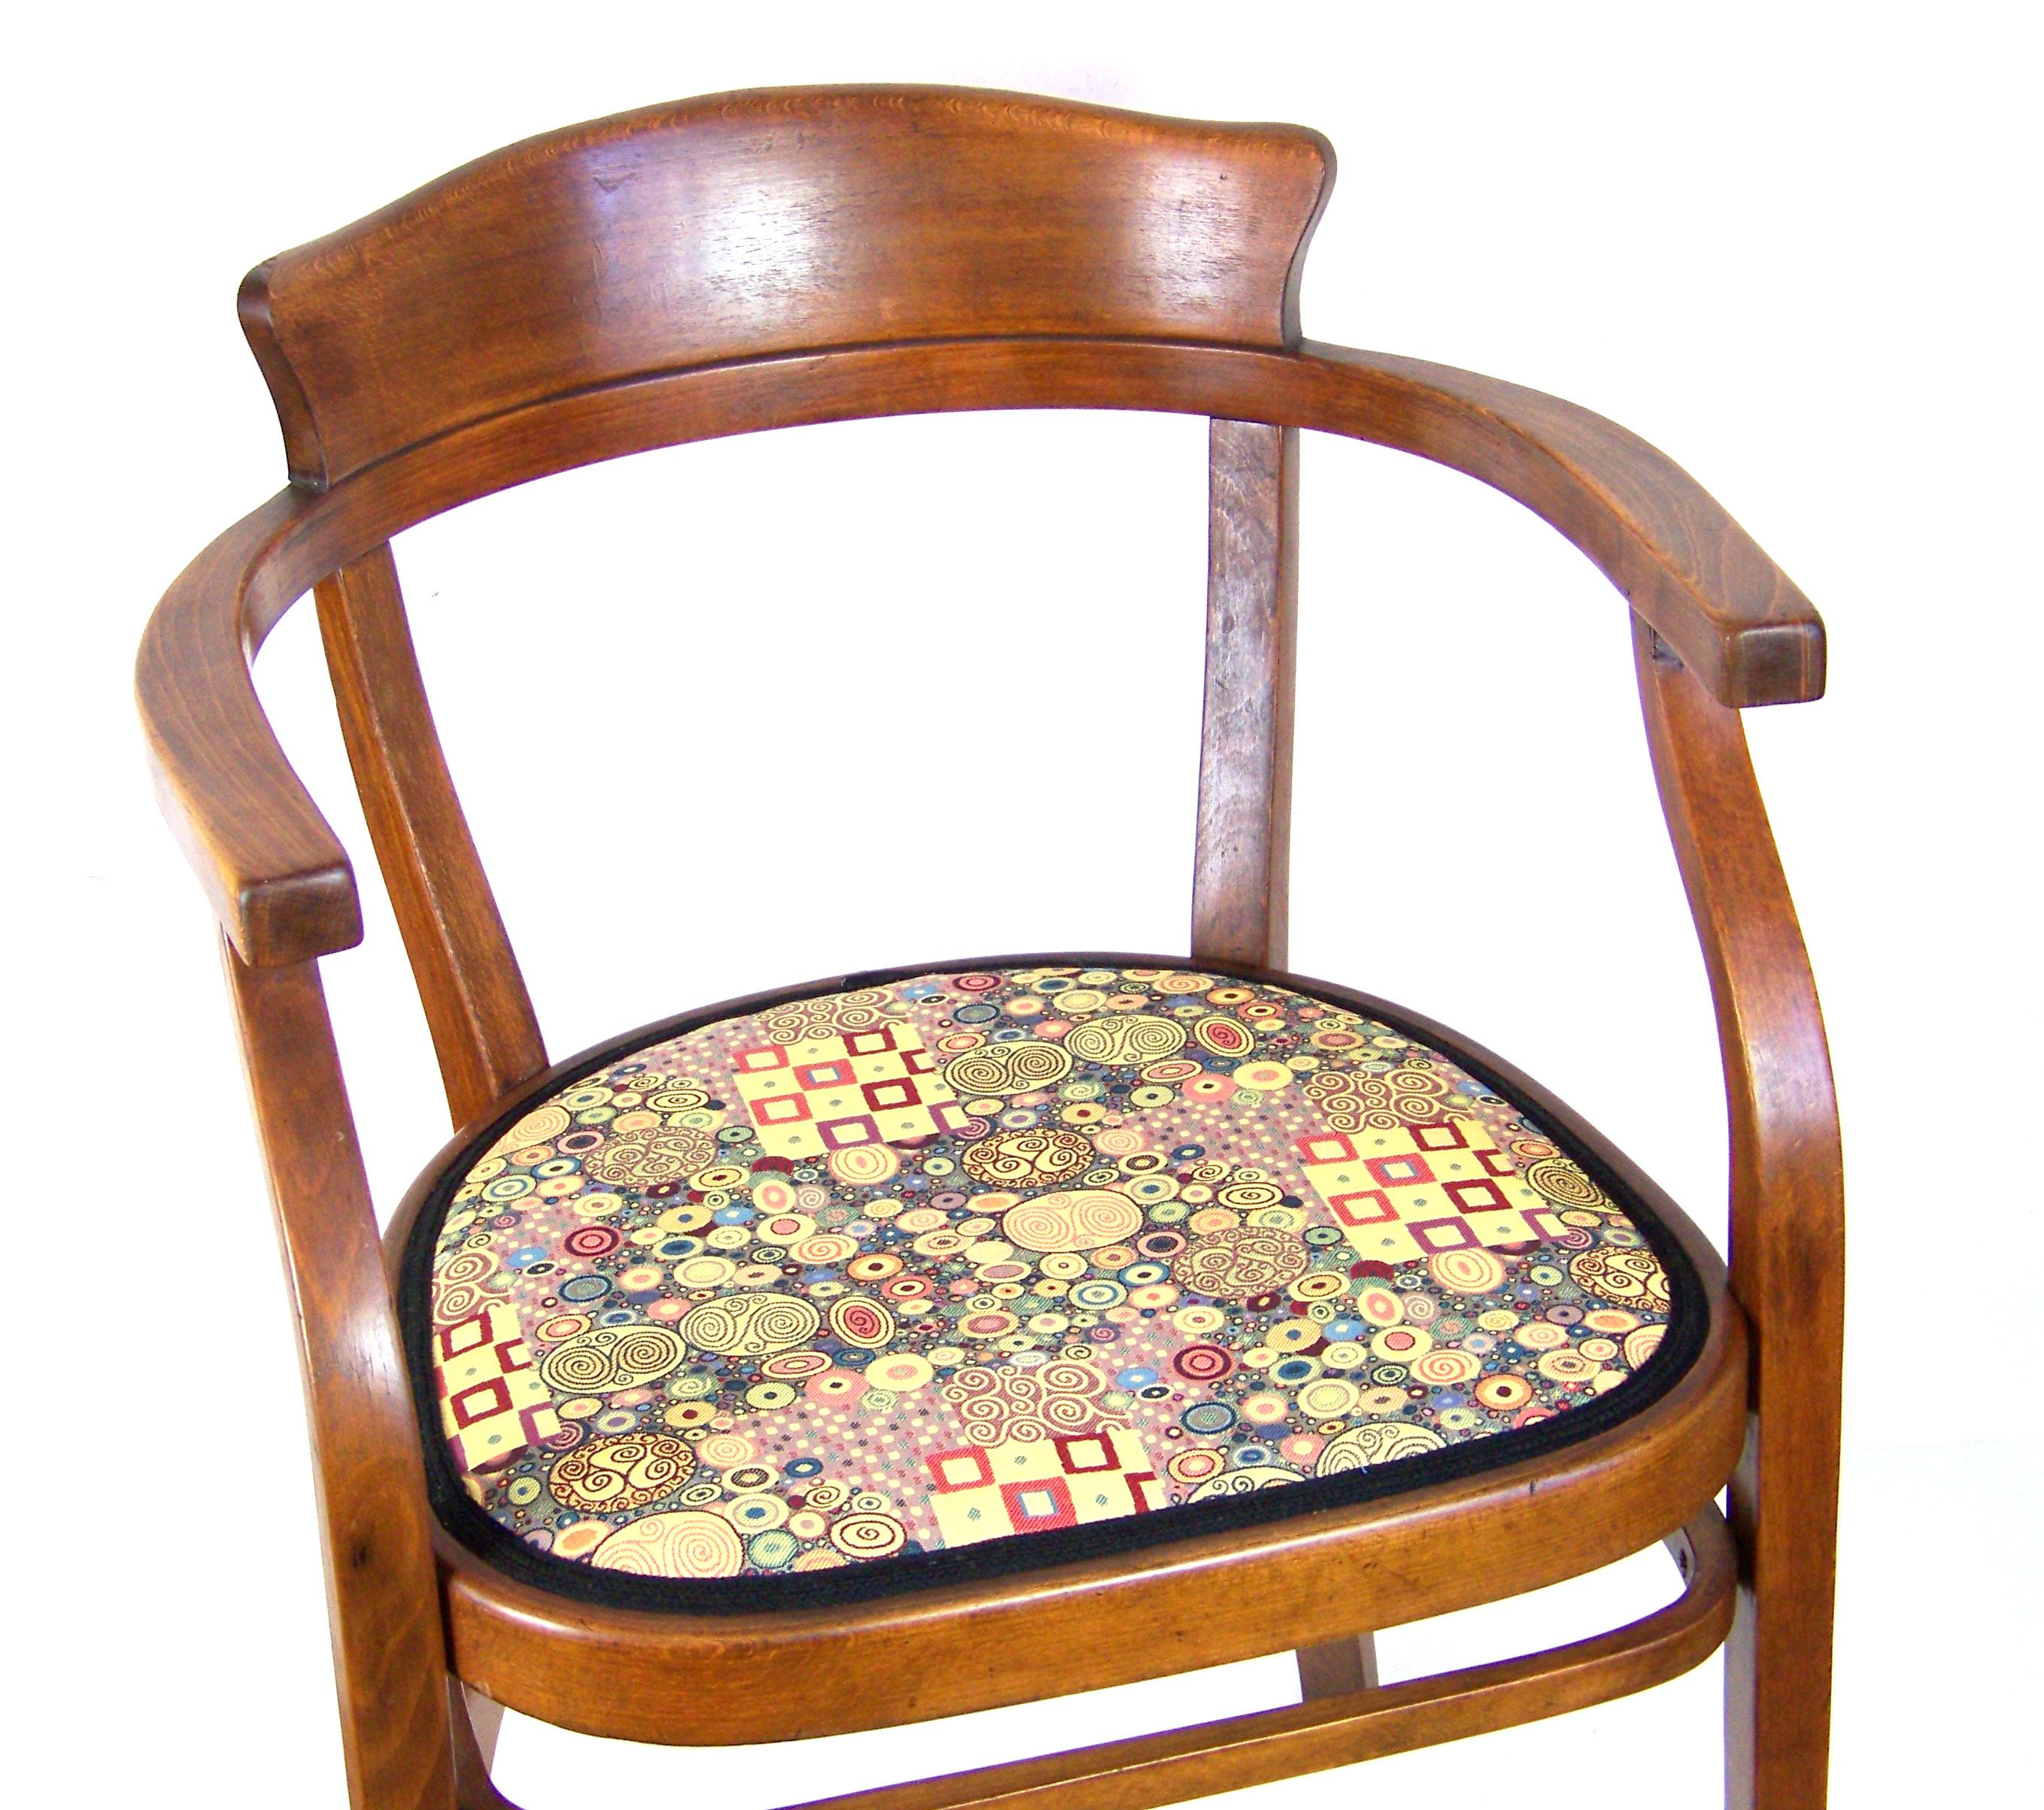 Perfectly cleaned and finely polished with shellac. New upholstery inspired by the work of Gustav Klimt.